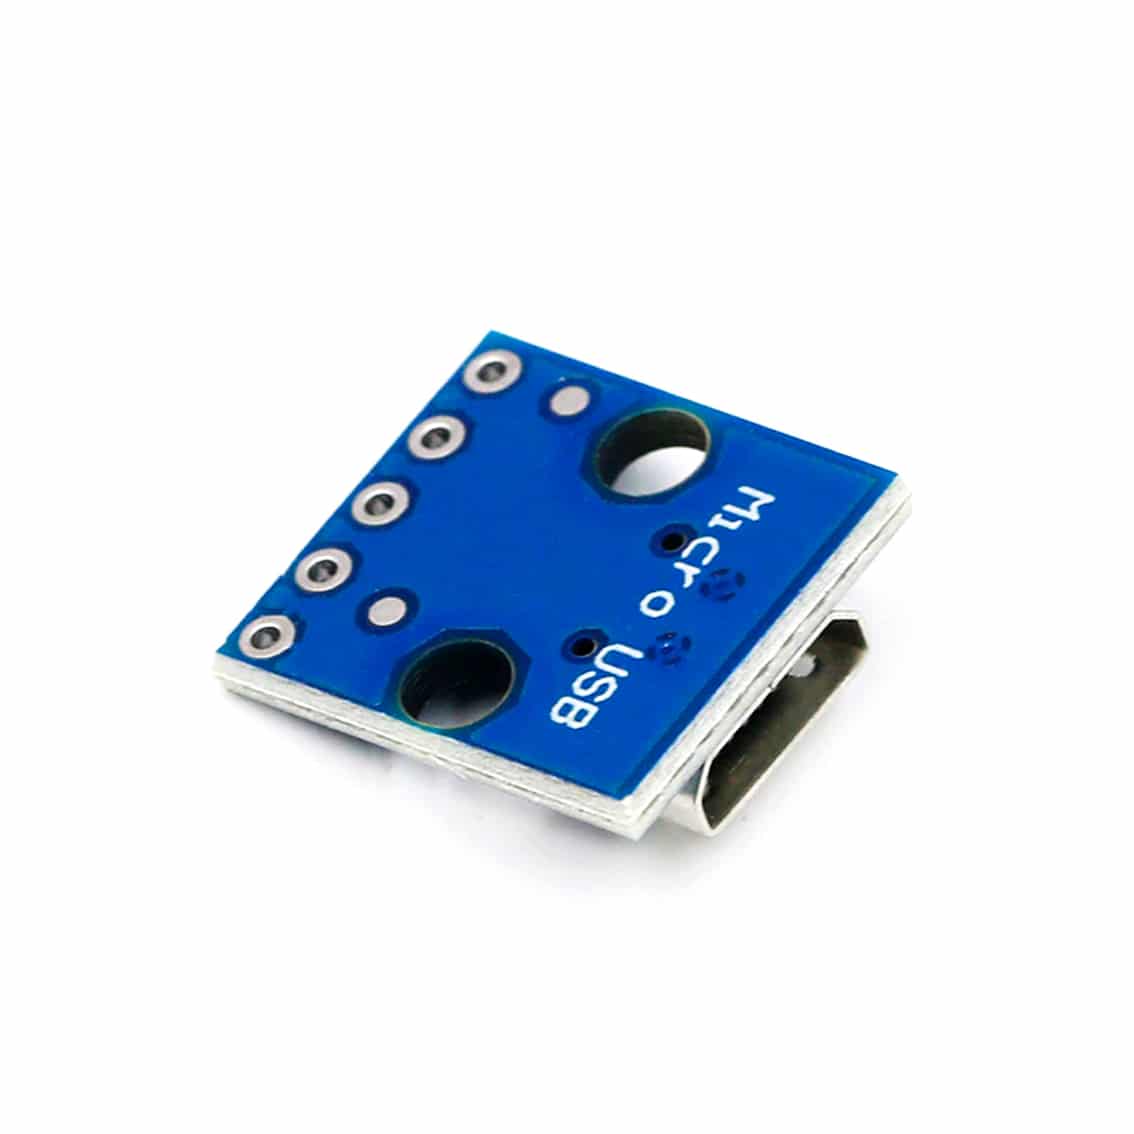 Cjmcu 5v Micro Usb Power Adapter Breakout Board Pack Of